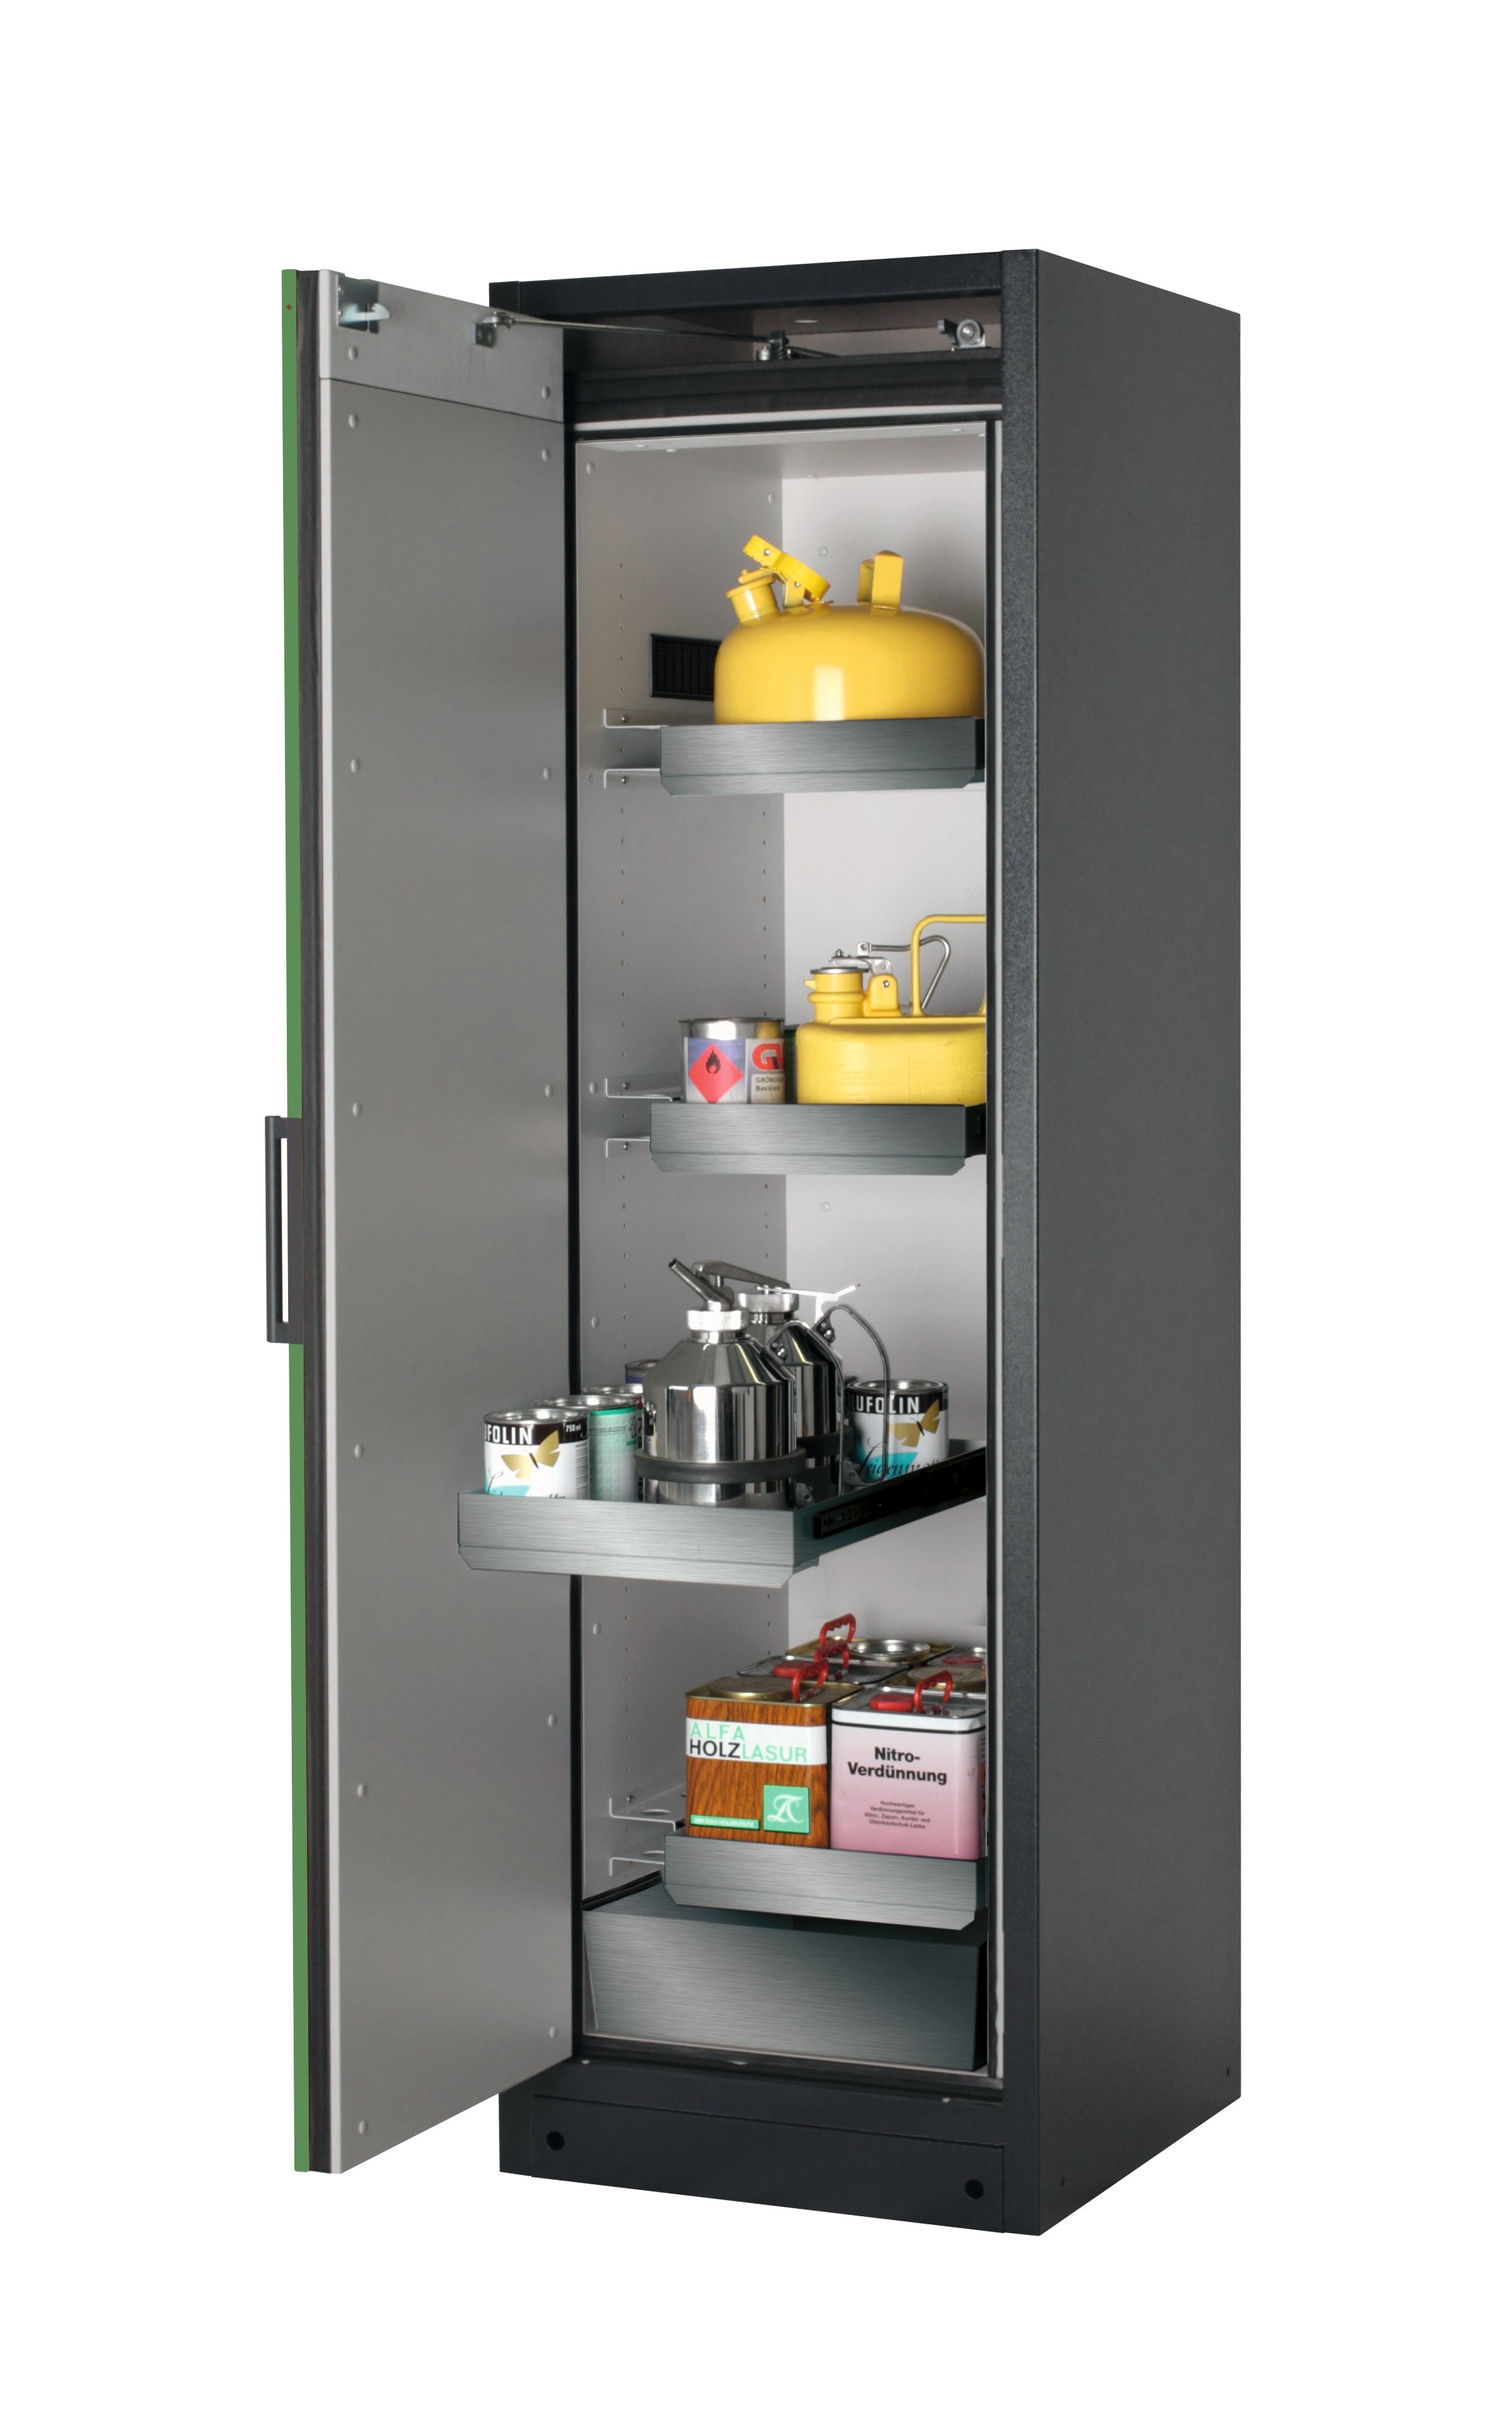 Type 90 safety storage cabinet Q-PEGASUS-90 model Q90.195.060.WDAC in reseda green RAL 6011 with 3x drawer (standard) (stainless steel 1.4301),